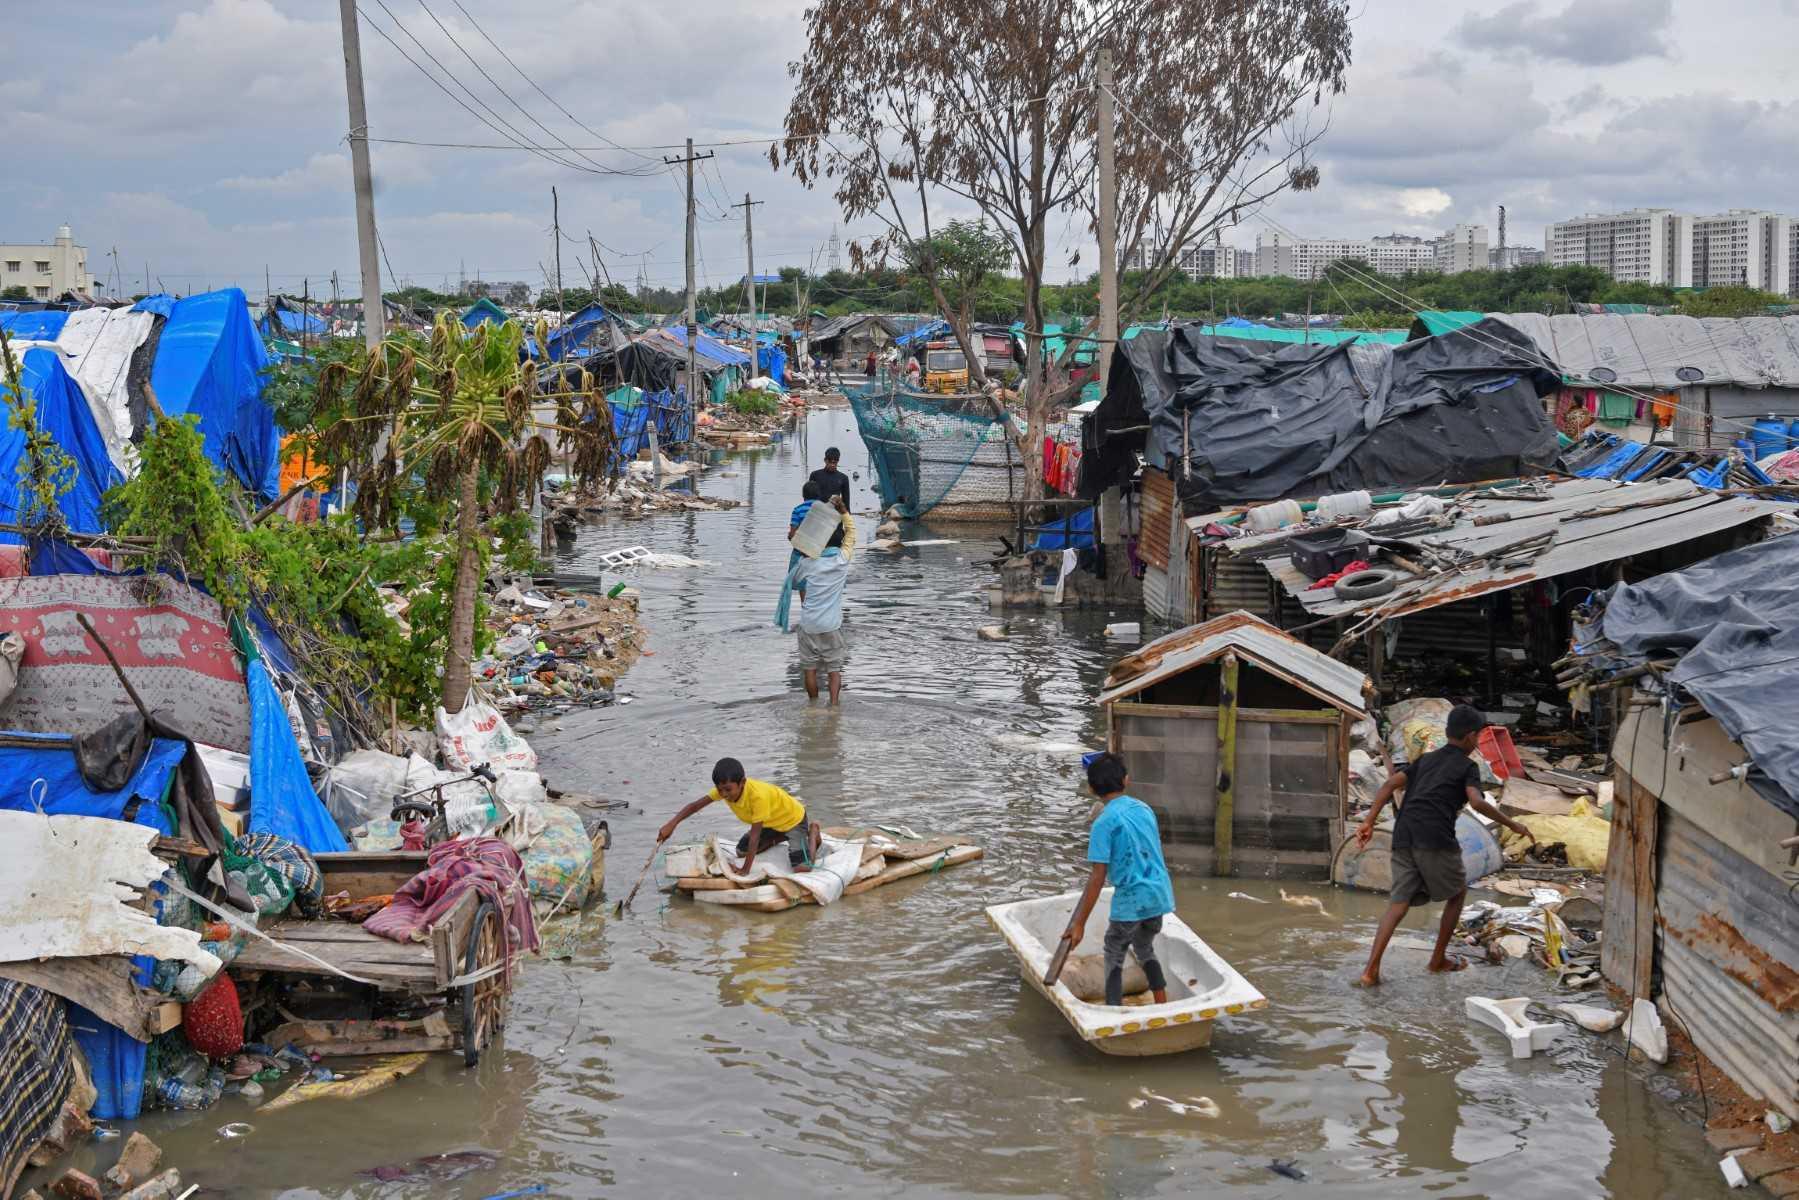 Children of workers living in a slum play around their waterlogged dwelling after heavy rains in Bangalore on Sept 7. Photo: AFP 